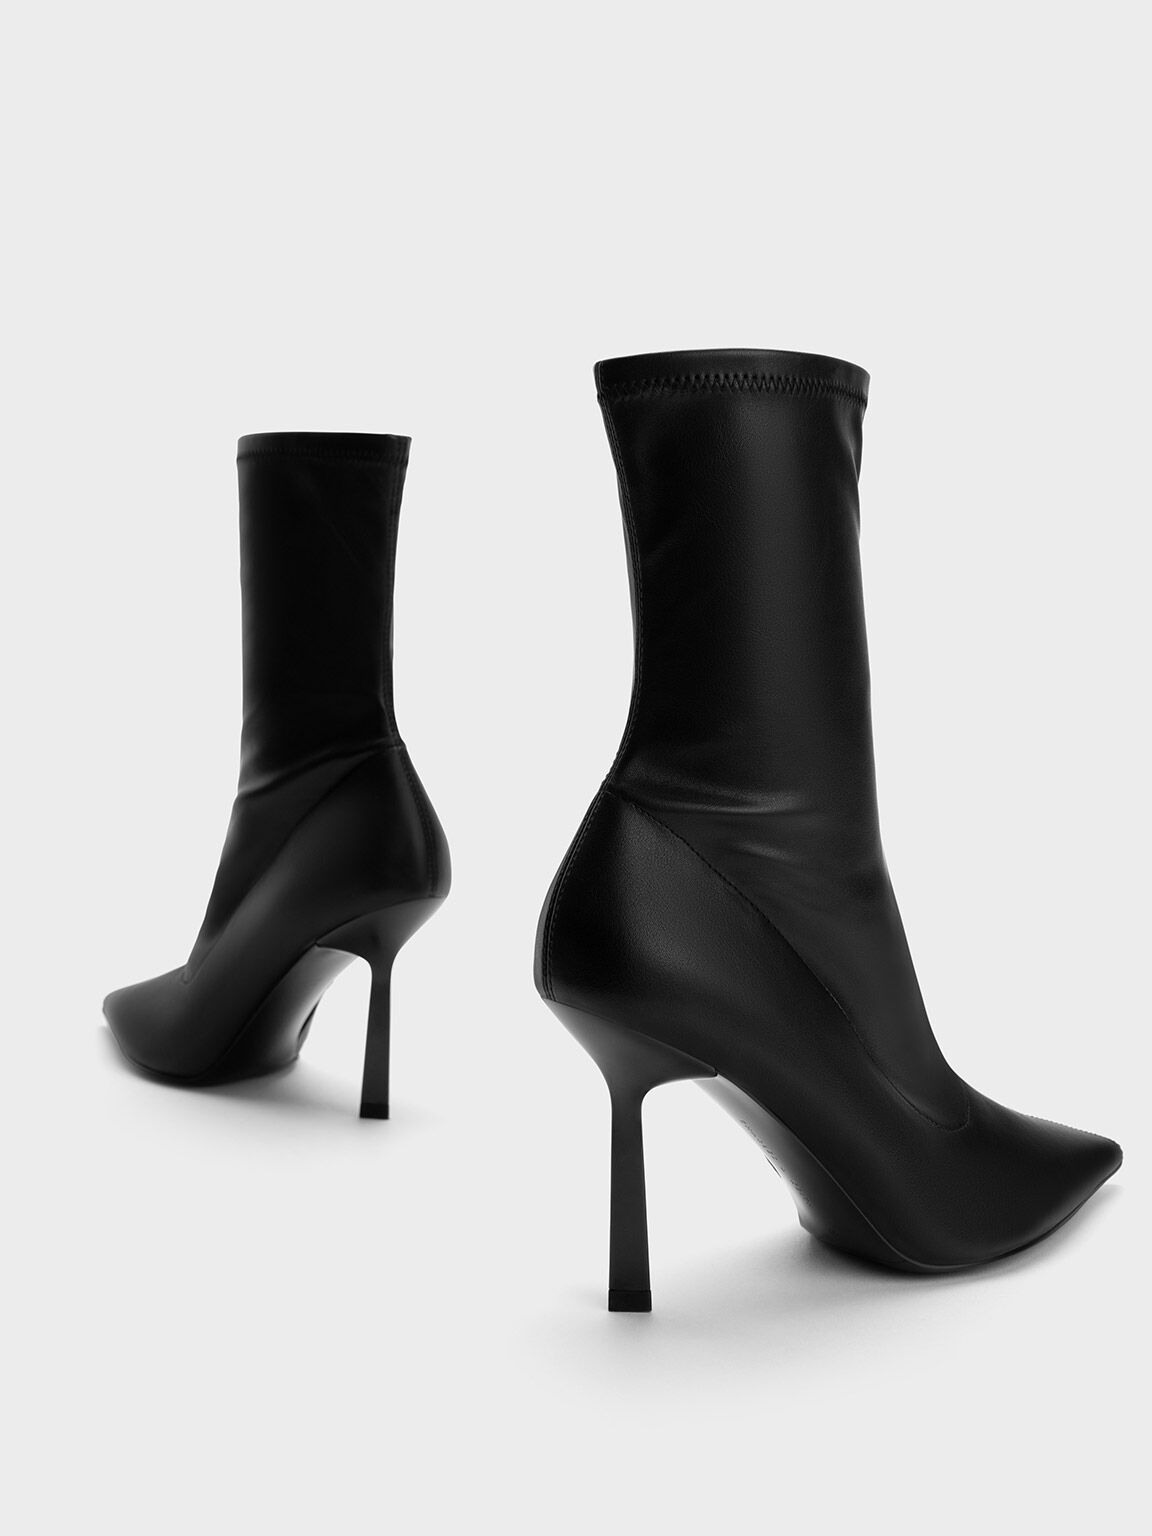 Black Pointed-Toe Stiletto Heel Ankle Boots - CHARLES & KEITH BG